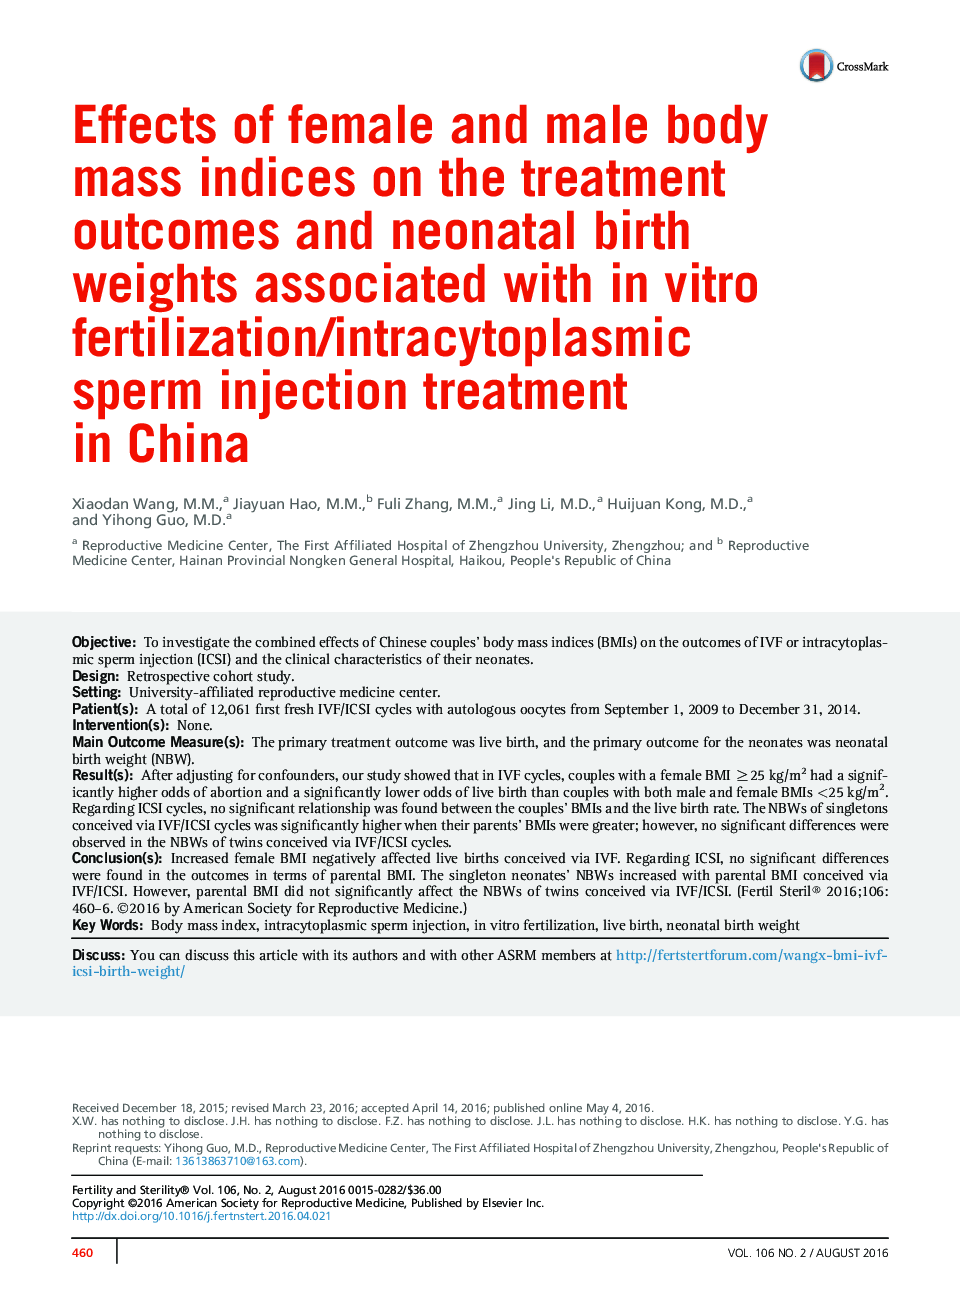 Effects of female and male body massÂ indices onÂ the treatment outcomes and neonatal birth weights associated with inÂ vitro fertilization/intracytoplasmic sperm injection treatment in China